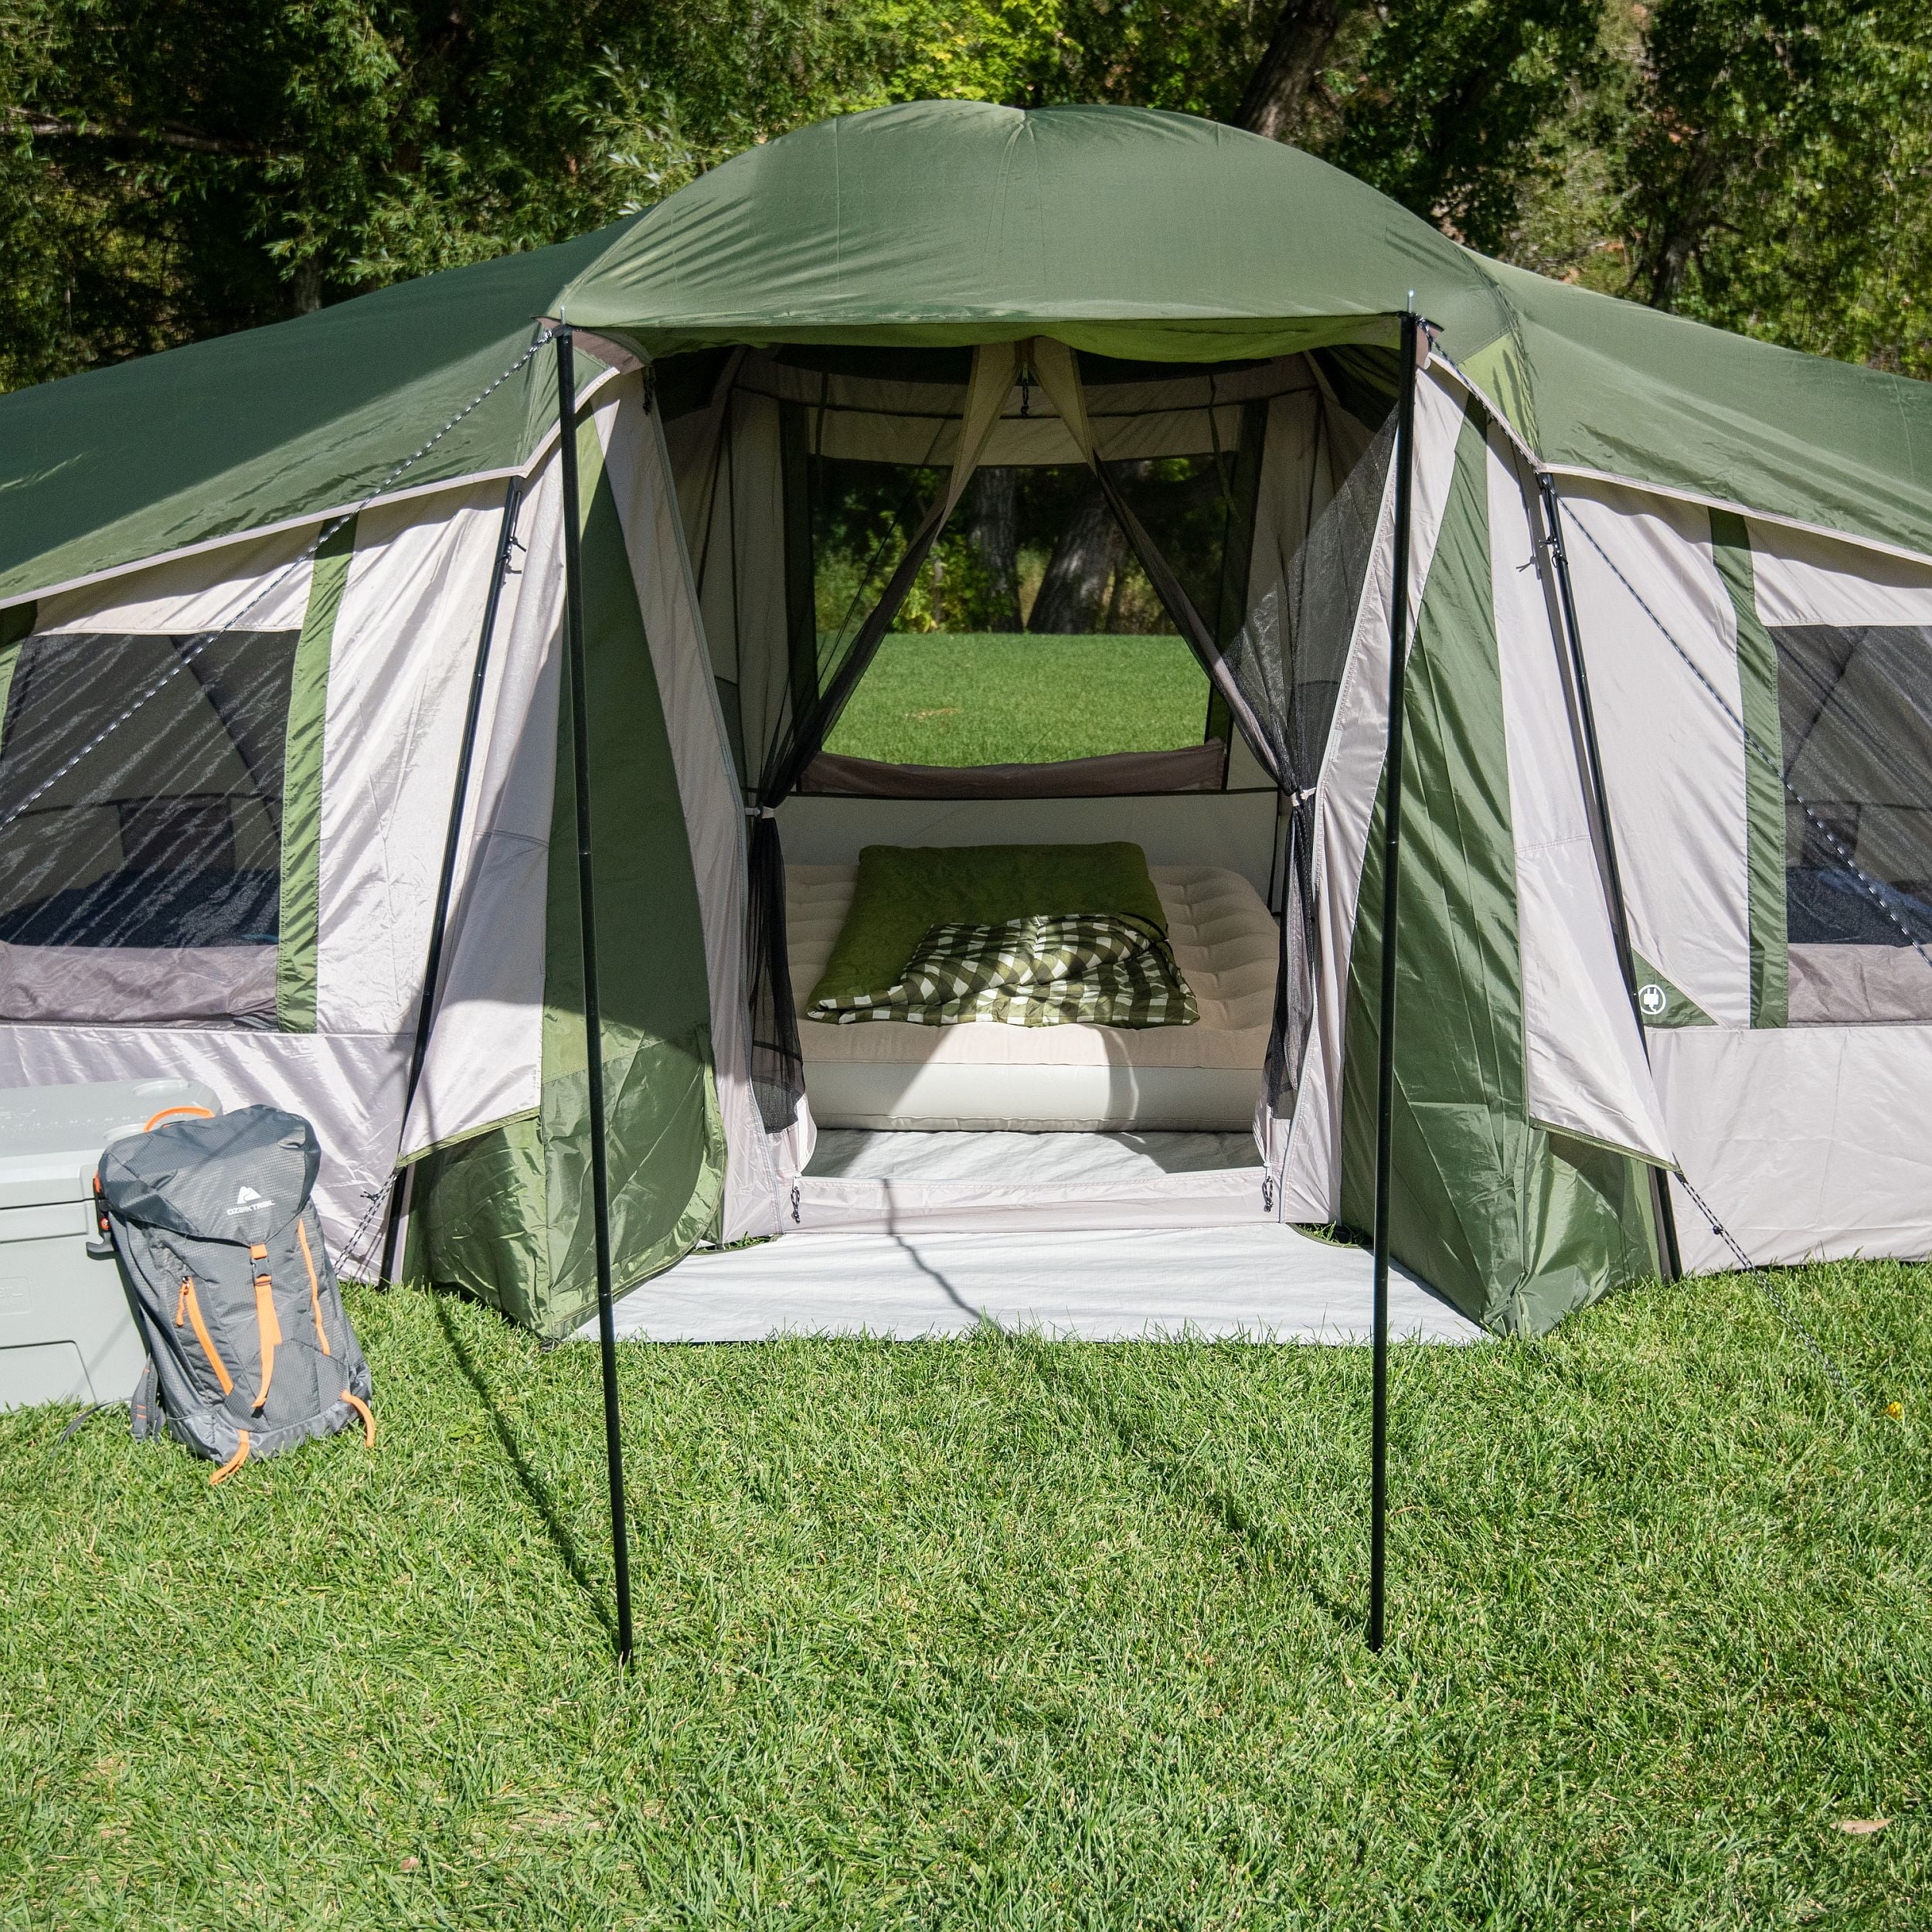 Afvoer klif heilig Ozark Trail 10-Person 3-Room Vacation Tent, with Shade Awning - Walmart.com